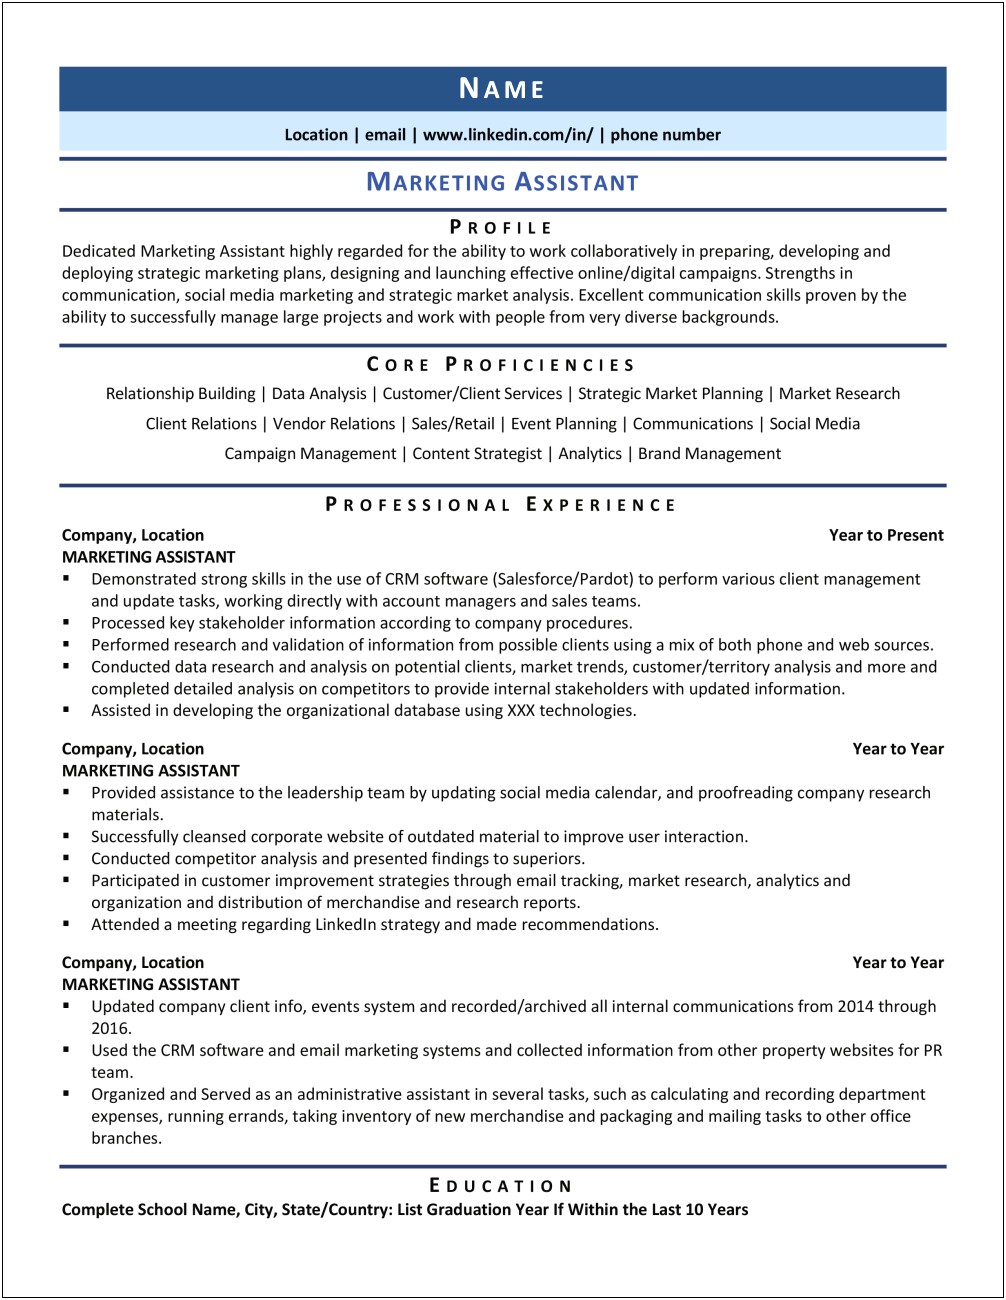 Marketing Resume With Reporting Skills